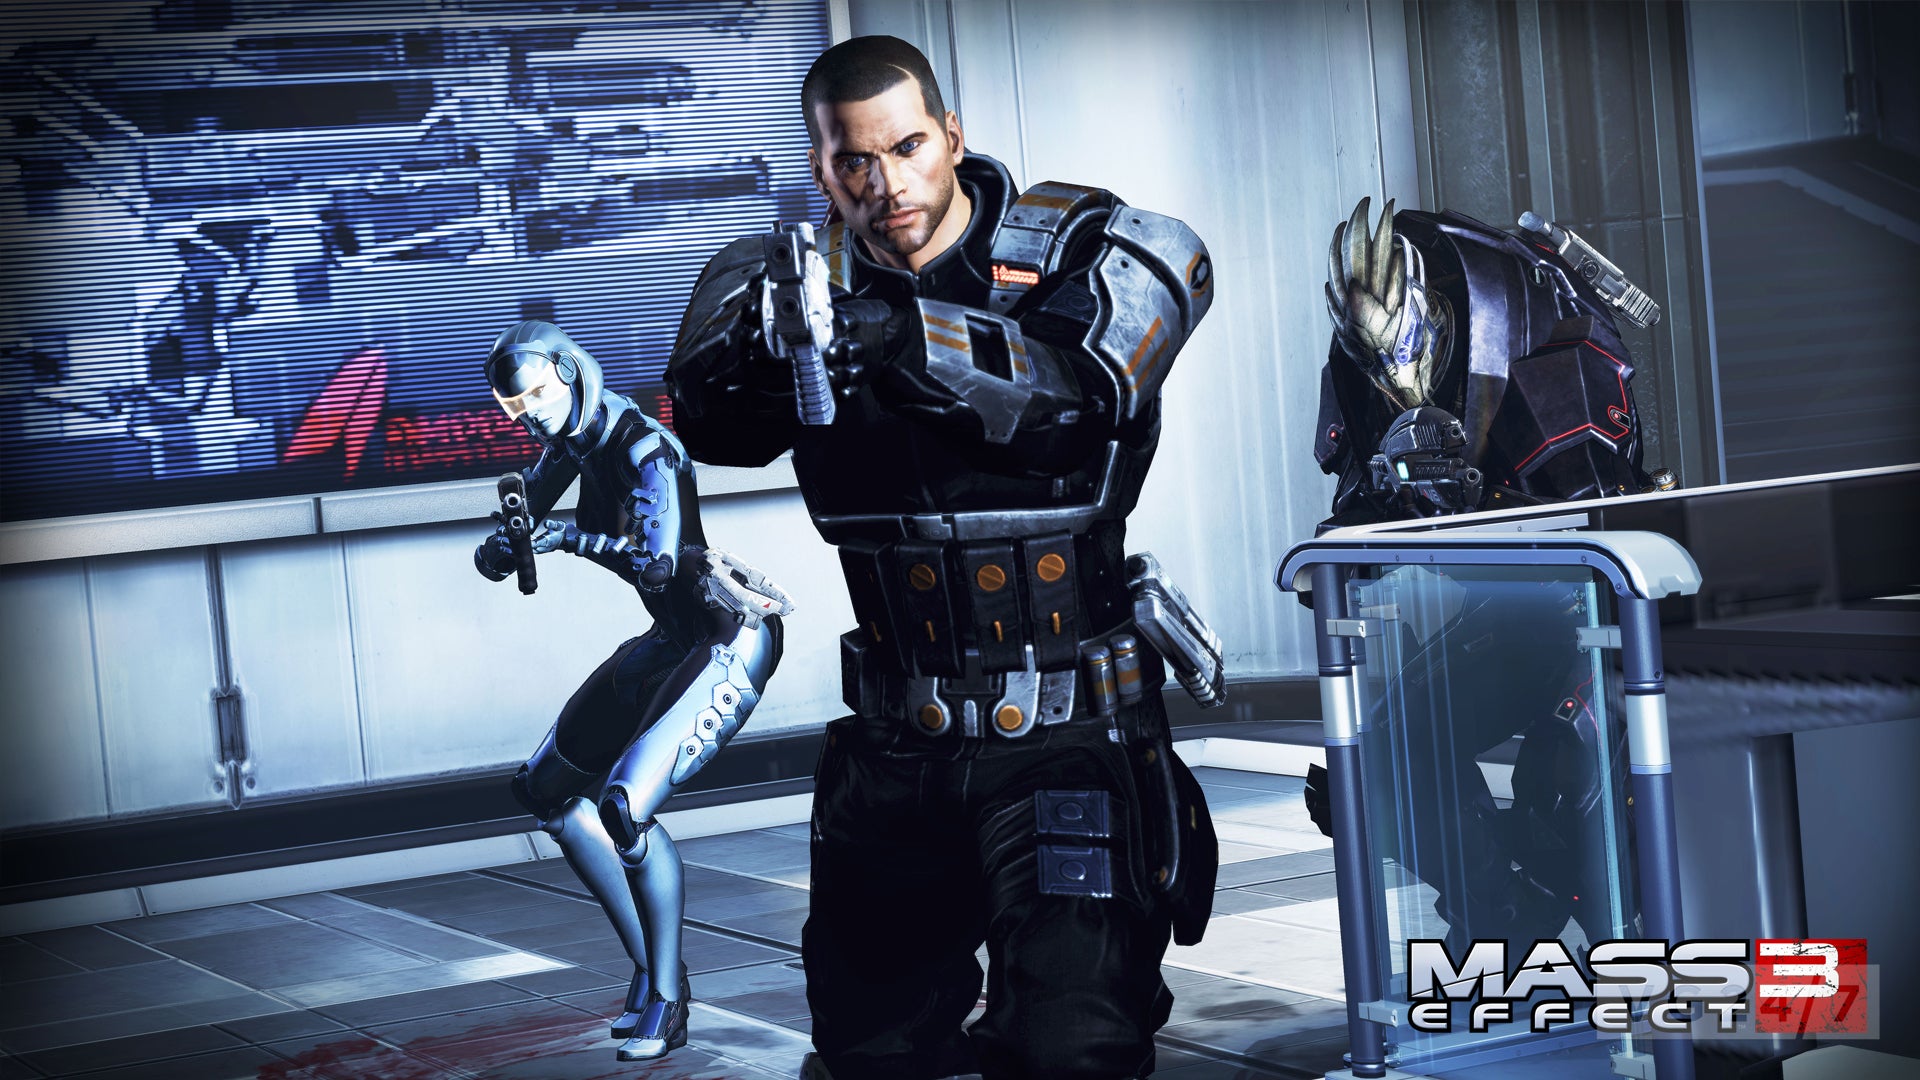 Image for Mass Effect 3 on sale on EU PSN, but not free 